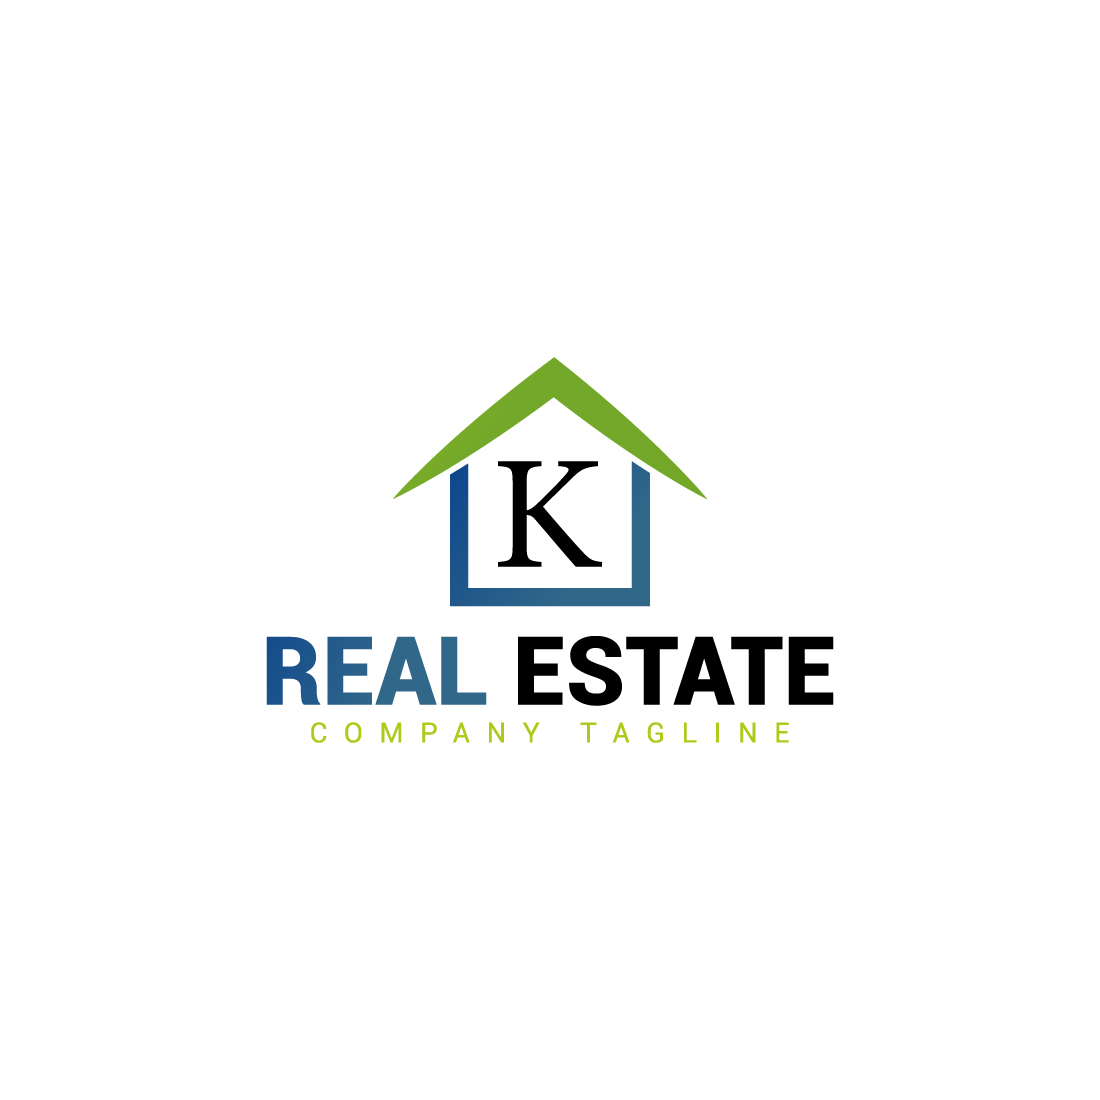 Real estate logo with green, dark blue color and K letter preview image.